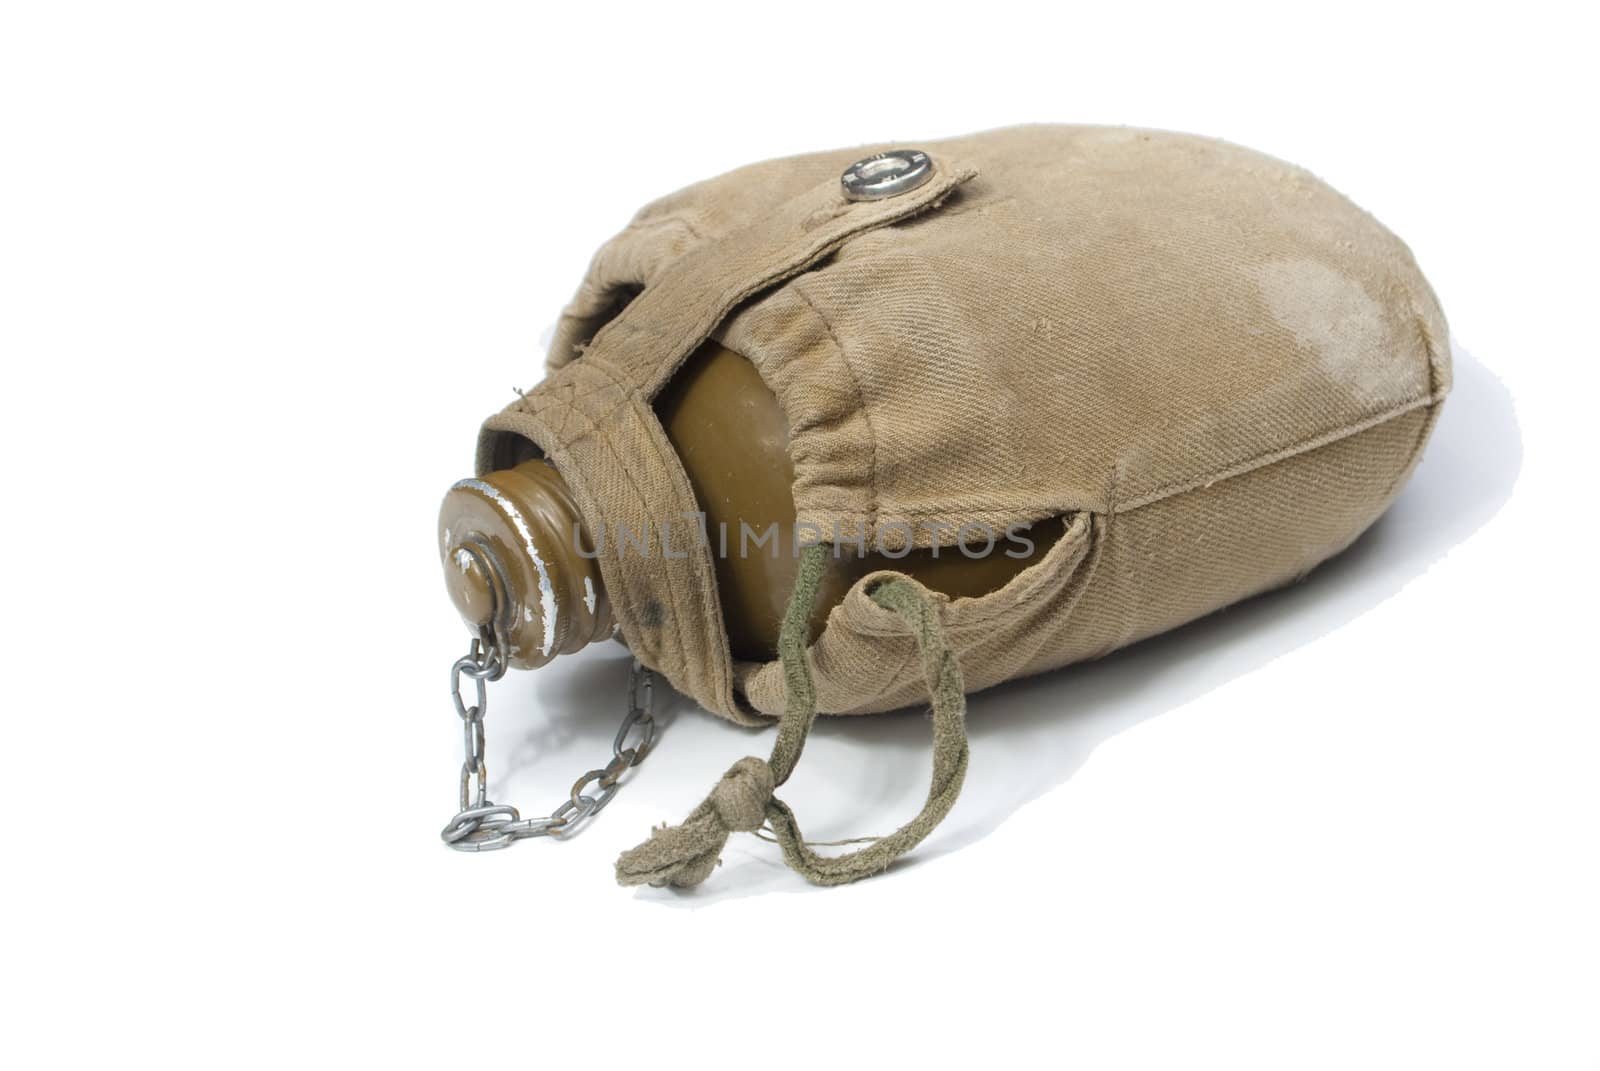 soldier's flask on white background